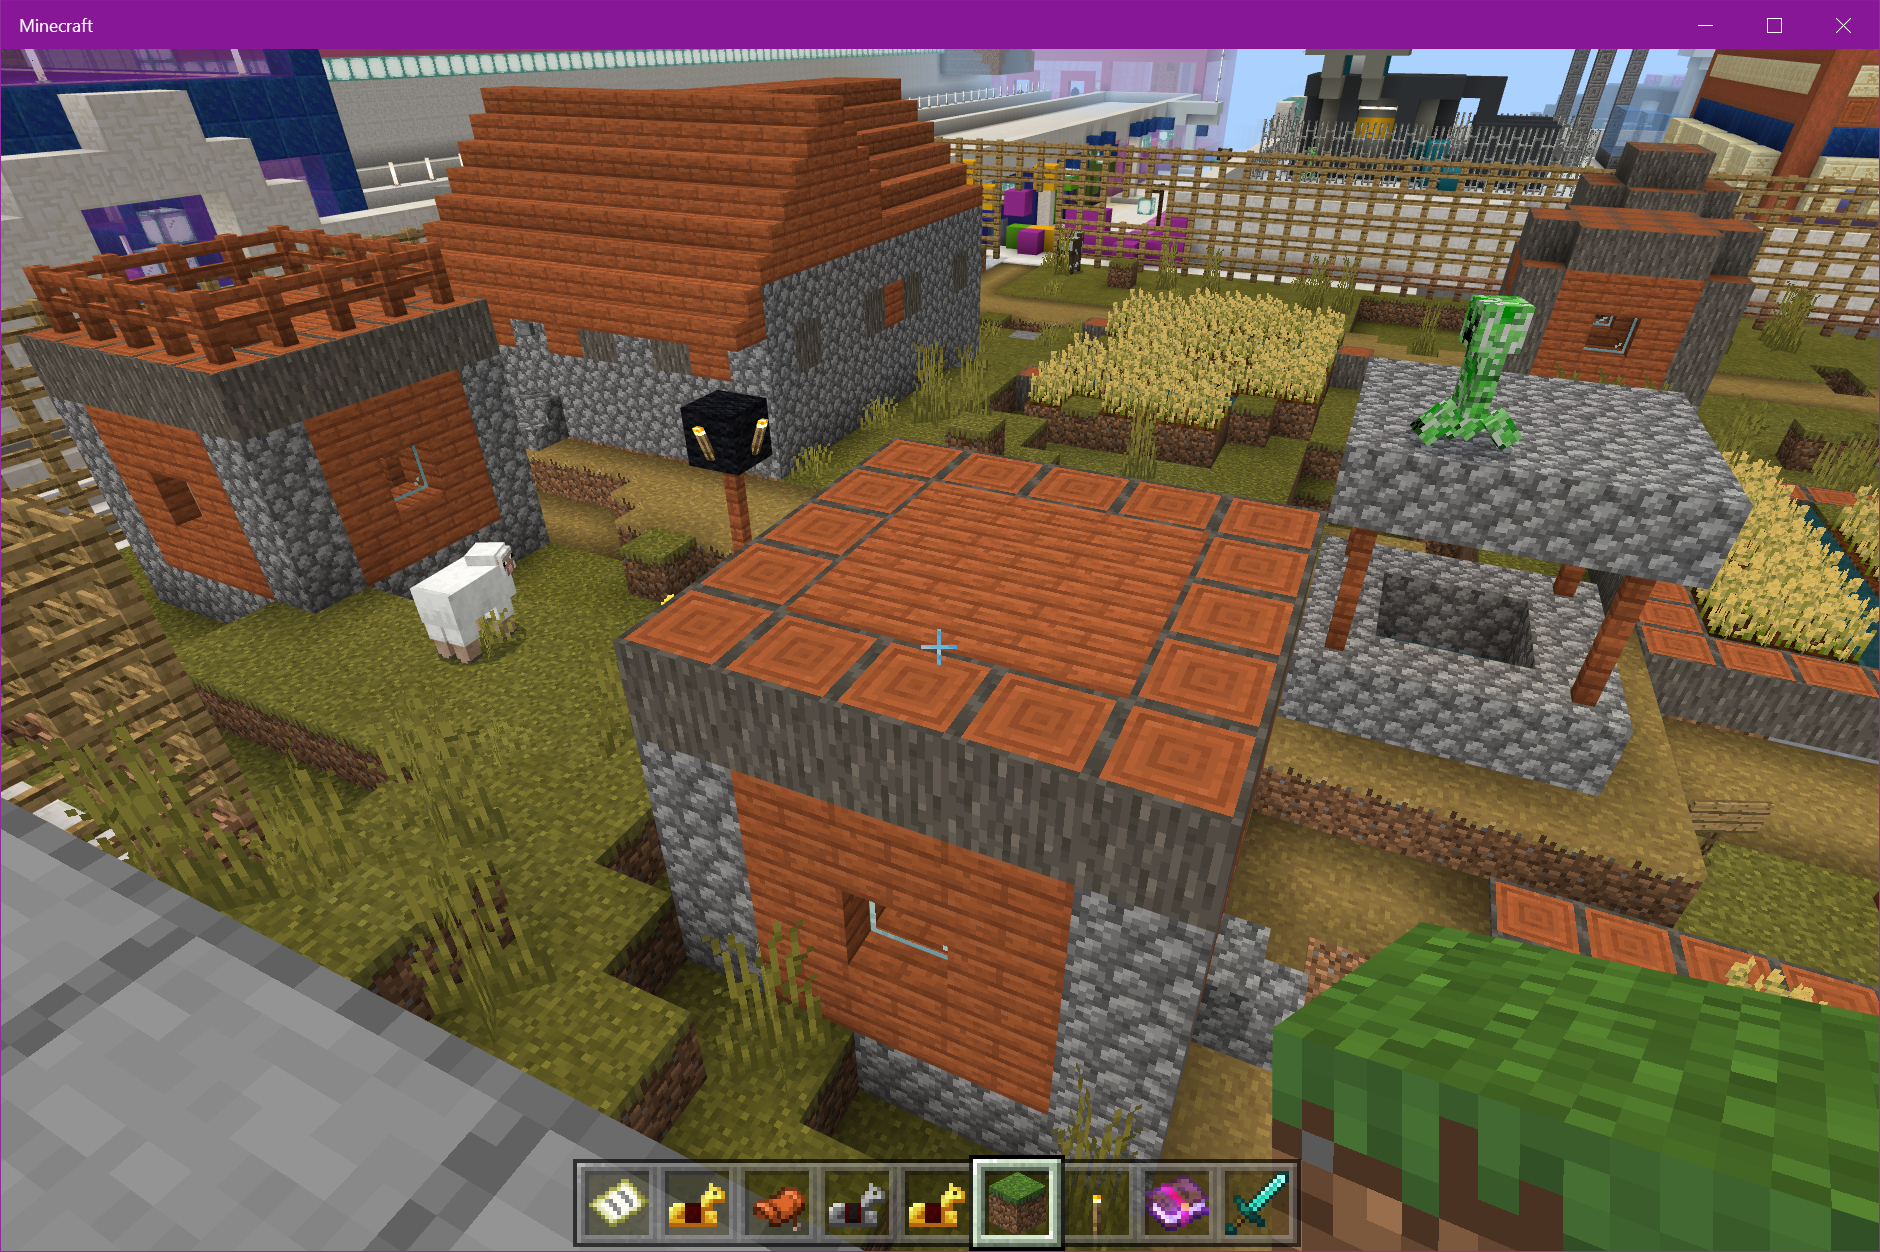 How to breed villagers in Minecraft | Digital Trends